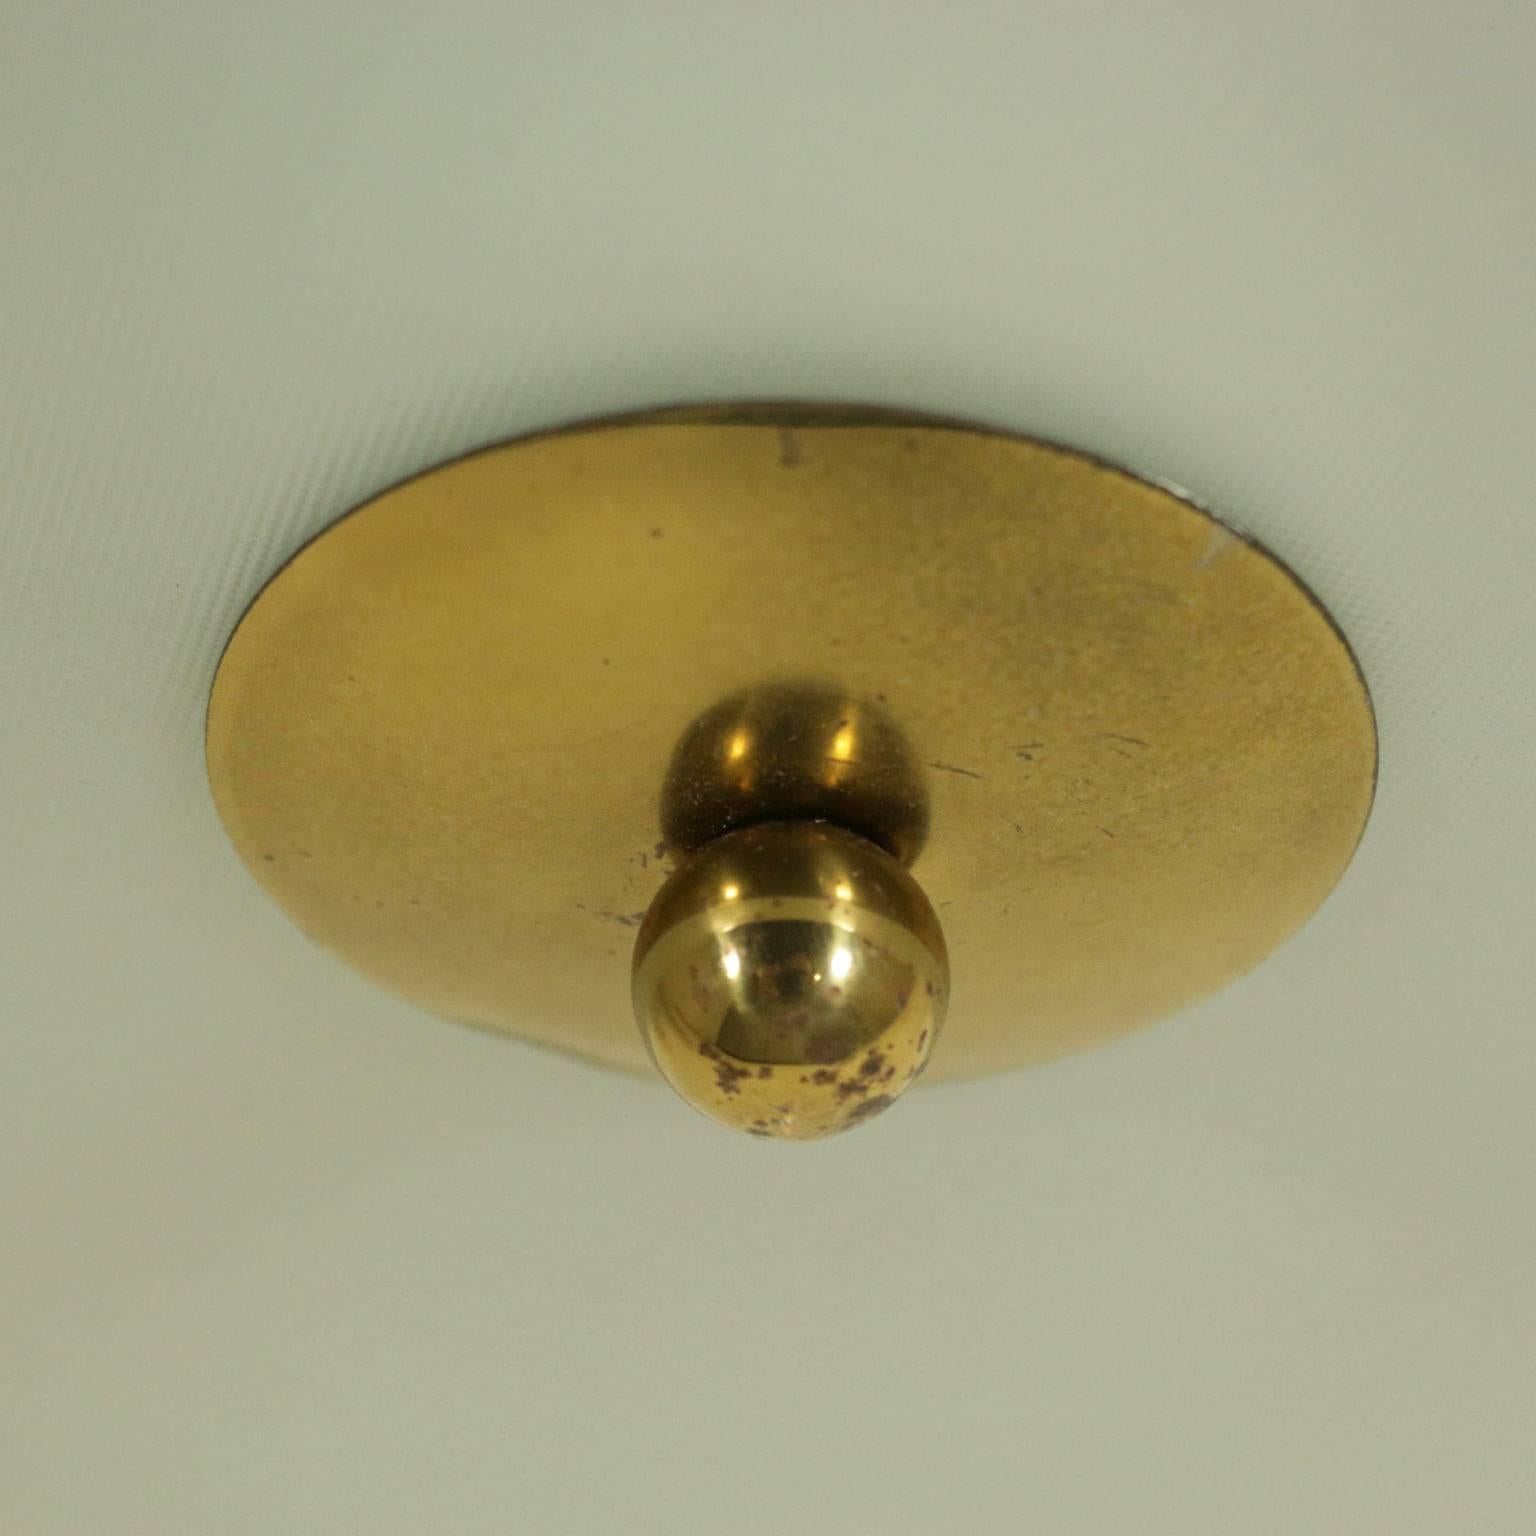 A ceiling or wall lamp in the style of Pietro Chiesa. Metal, brass and knurled glass. Manufactured in Italy, 1950s.